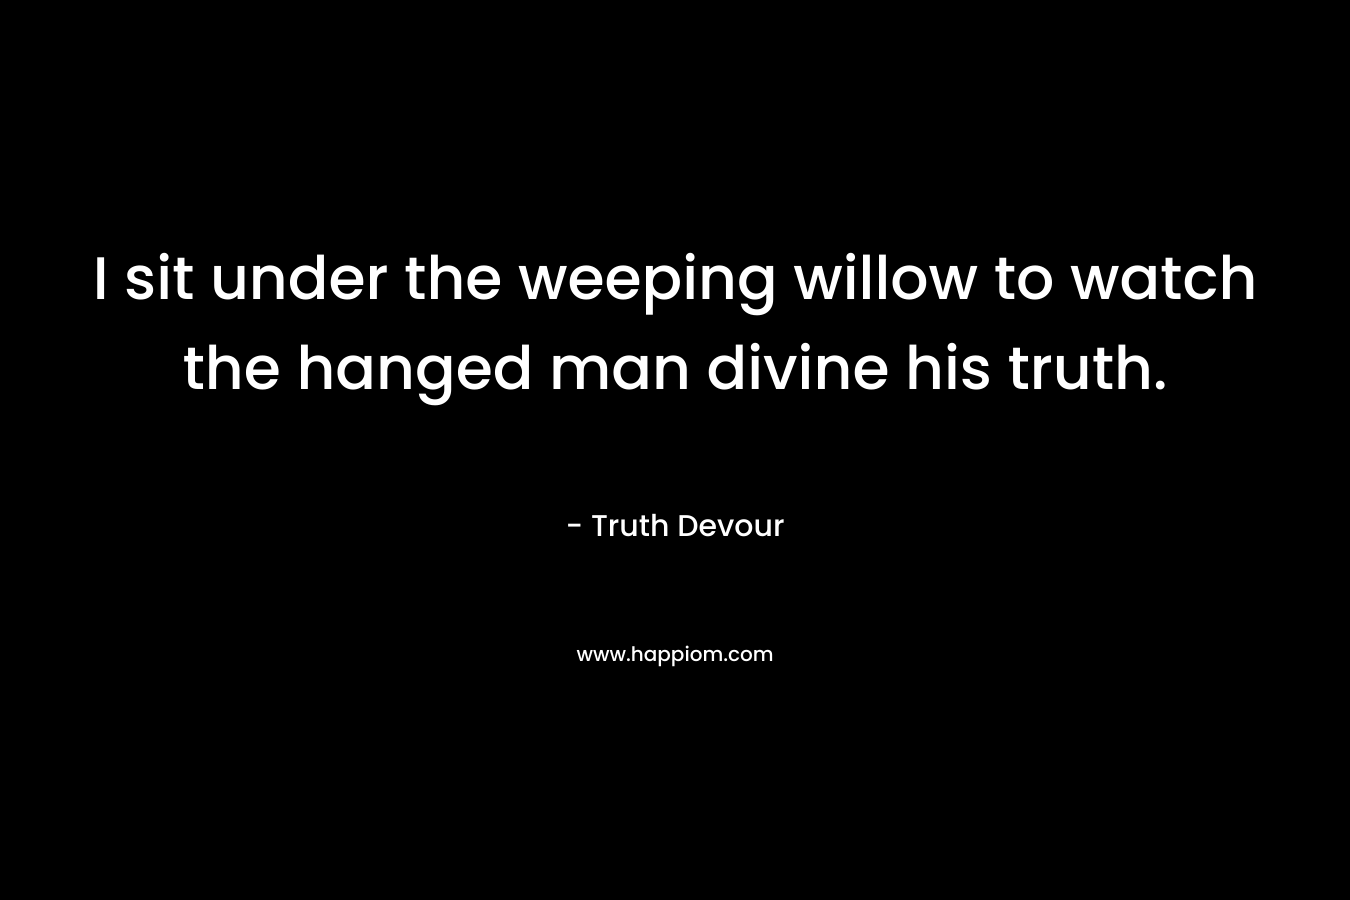 I sit under the weeping willow to watch the hanged man divine his truth.